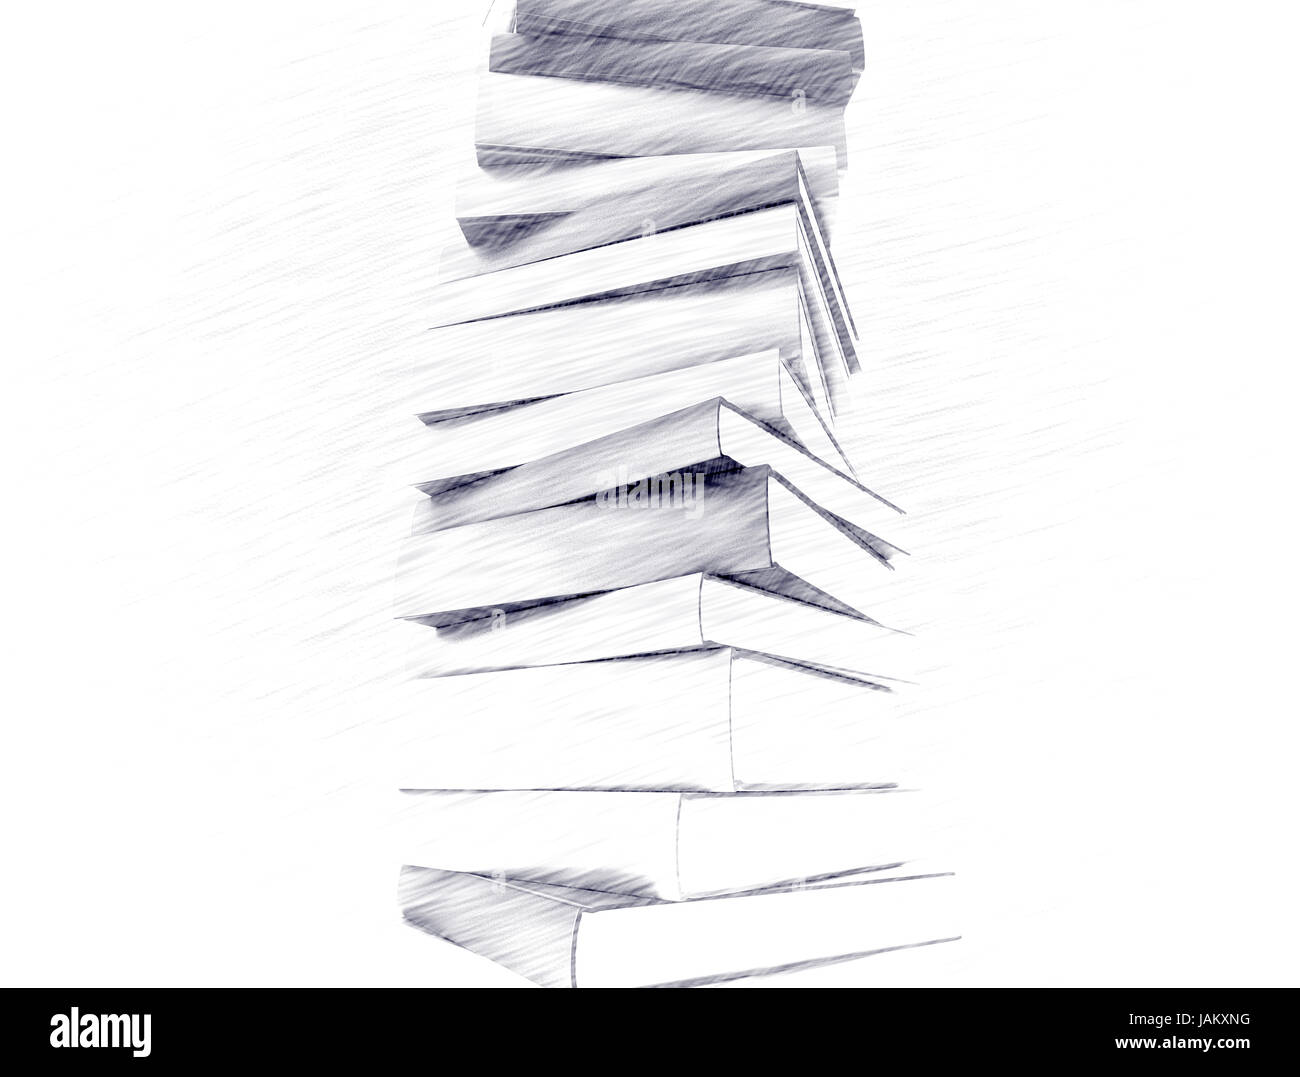 Pencil sketch big stack of books Stock Photo